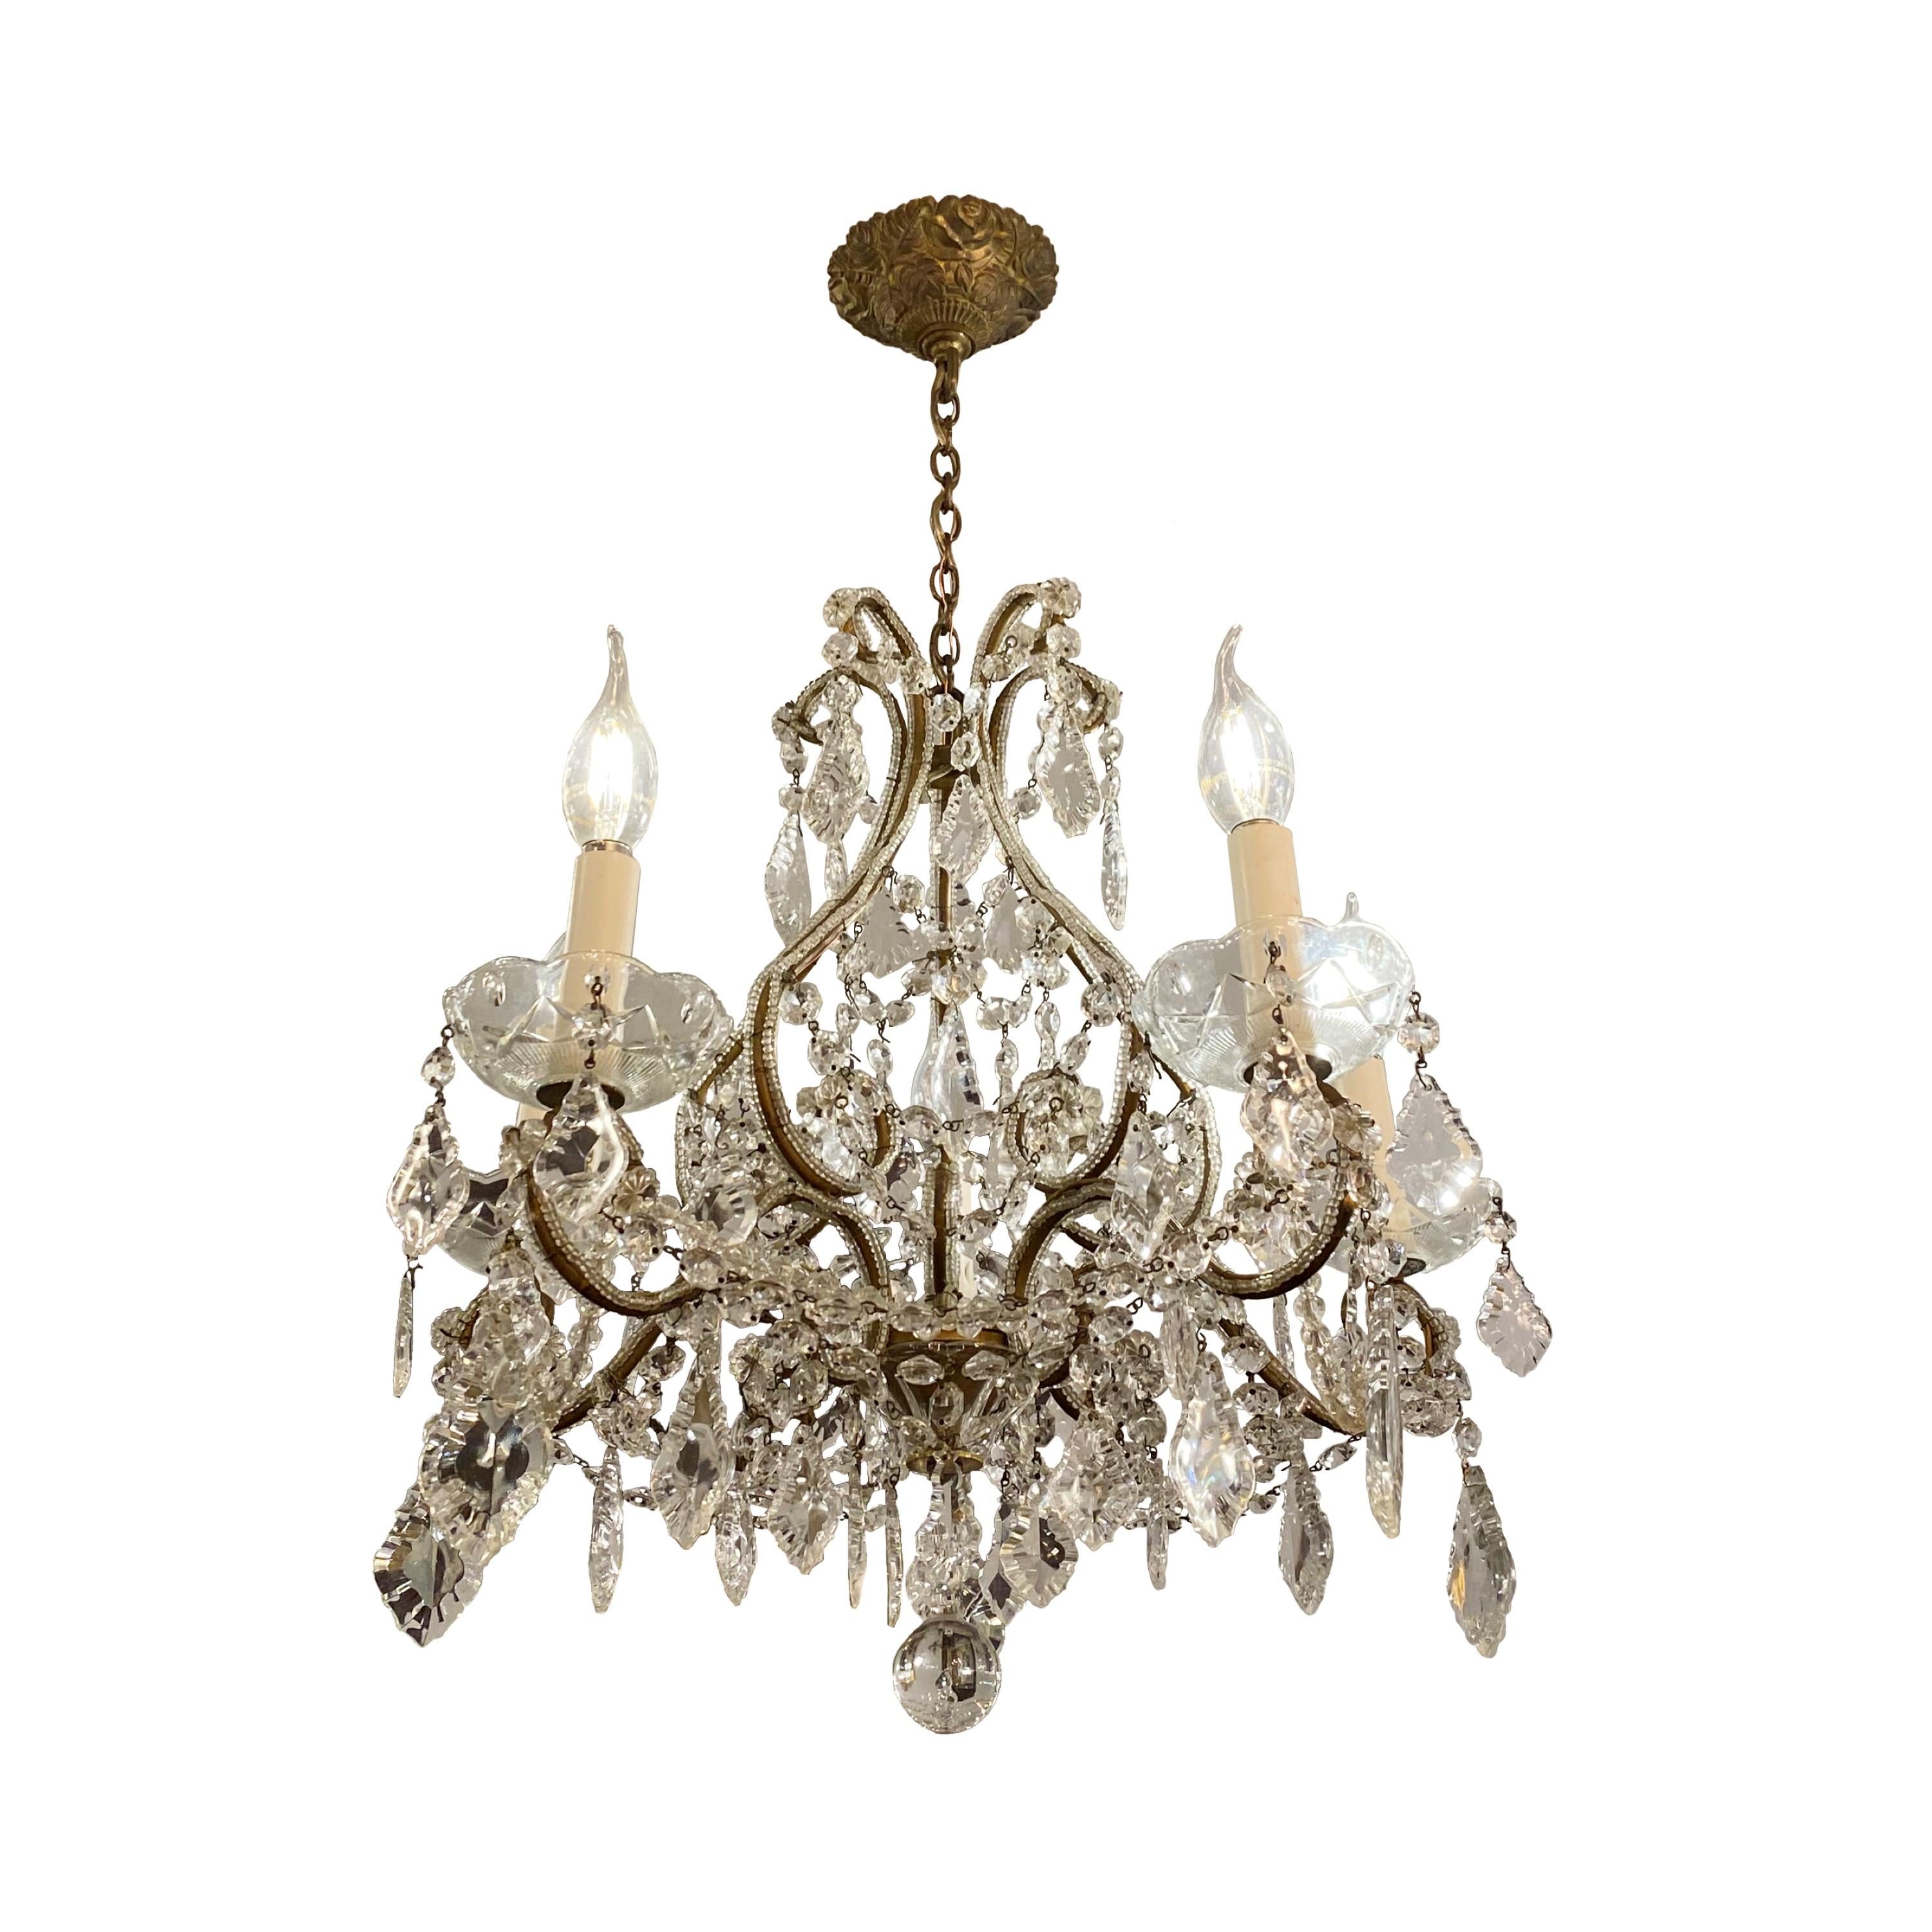 20th century Petite clear crystal chandelier with five beaded brass arms and matching ornate canopy. Takes five standard candelabra lightbulbs. Cleaned and restored. Please note, this item is located in one of our NYC locations.